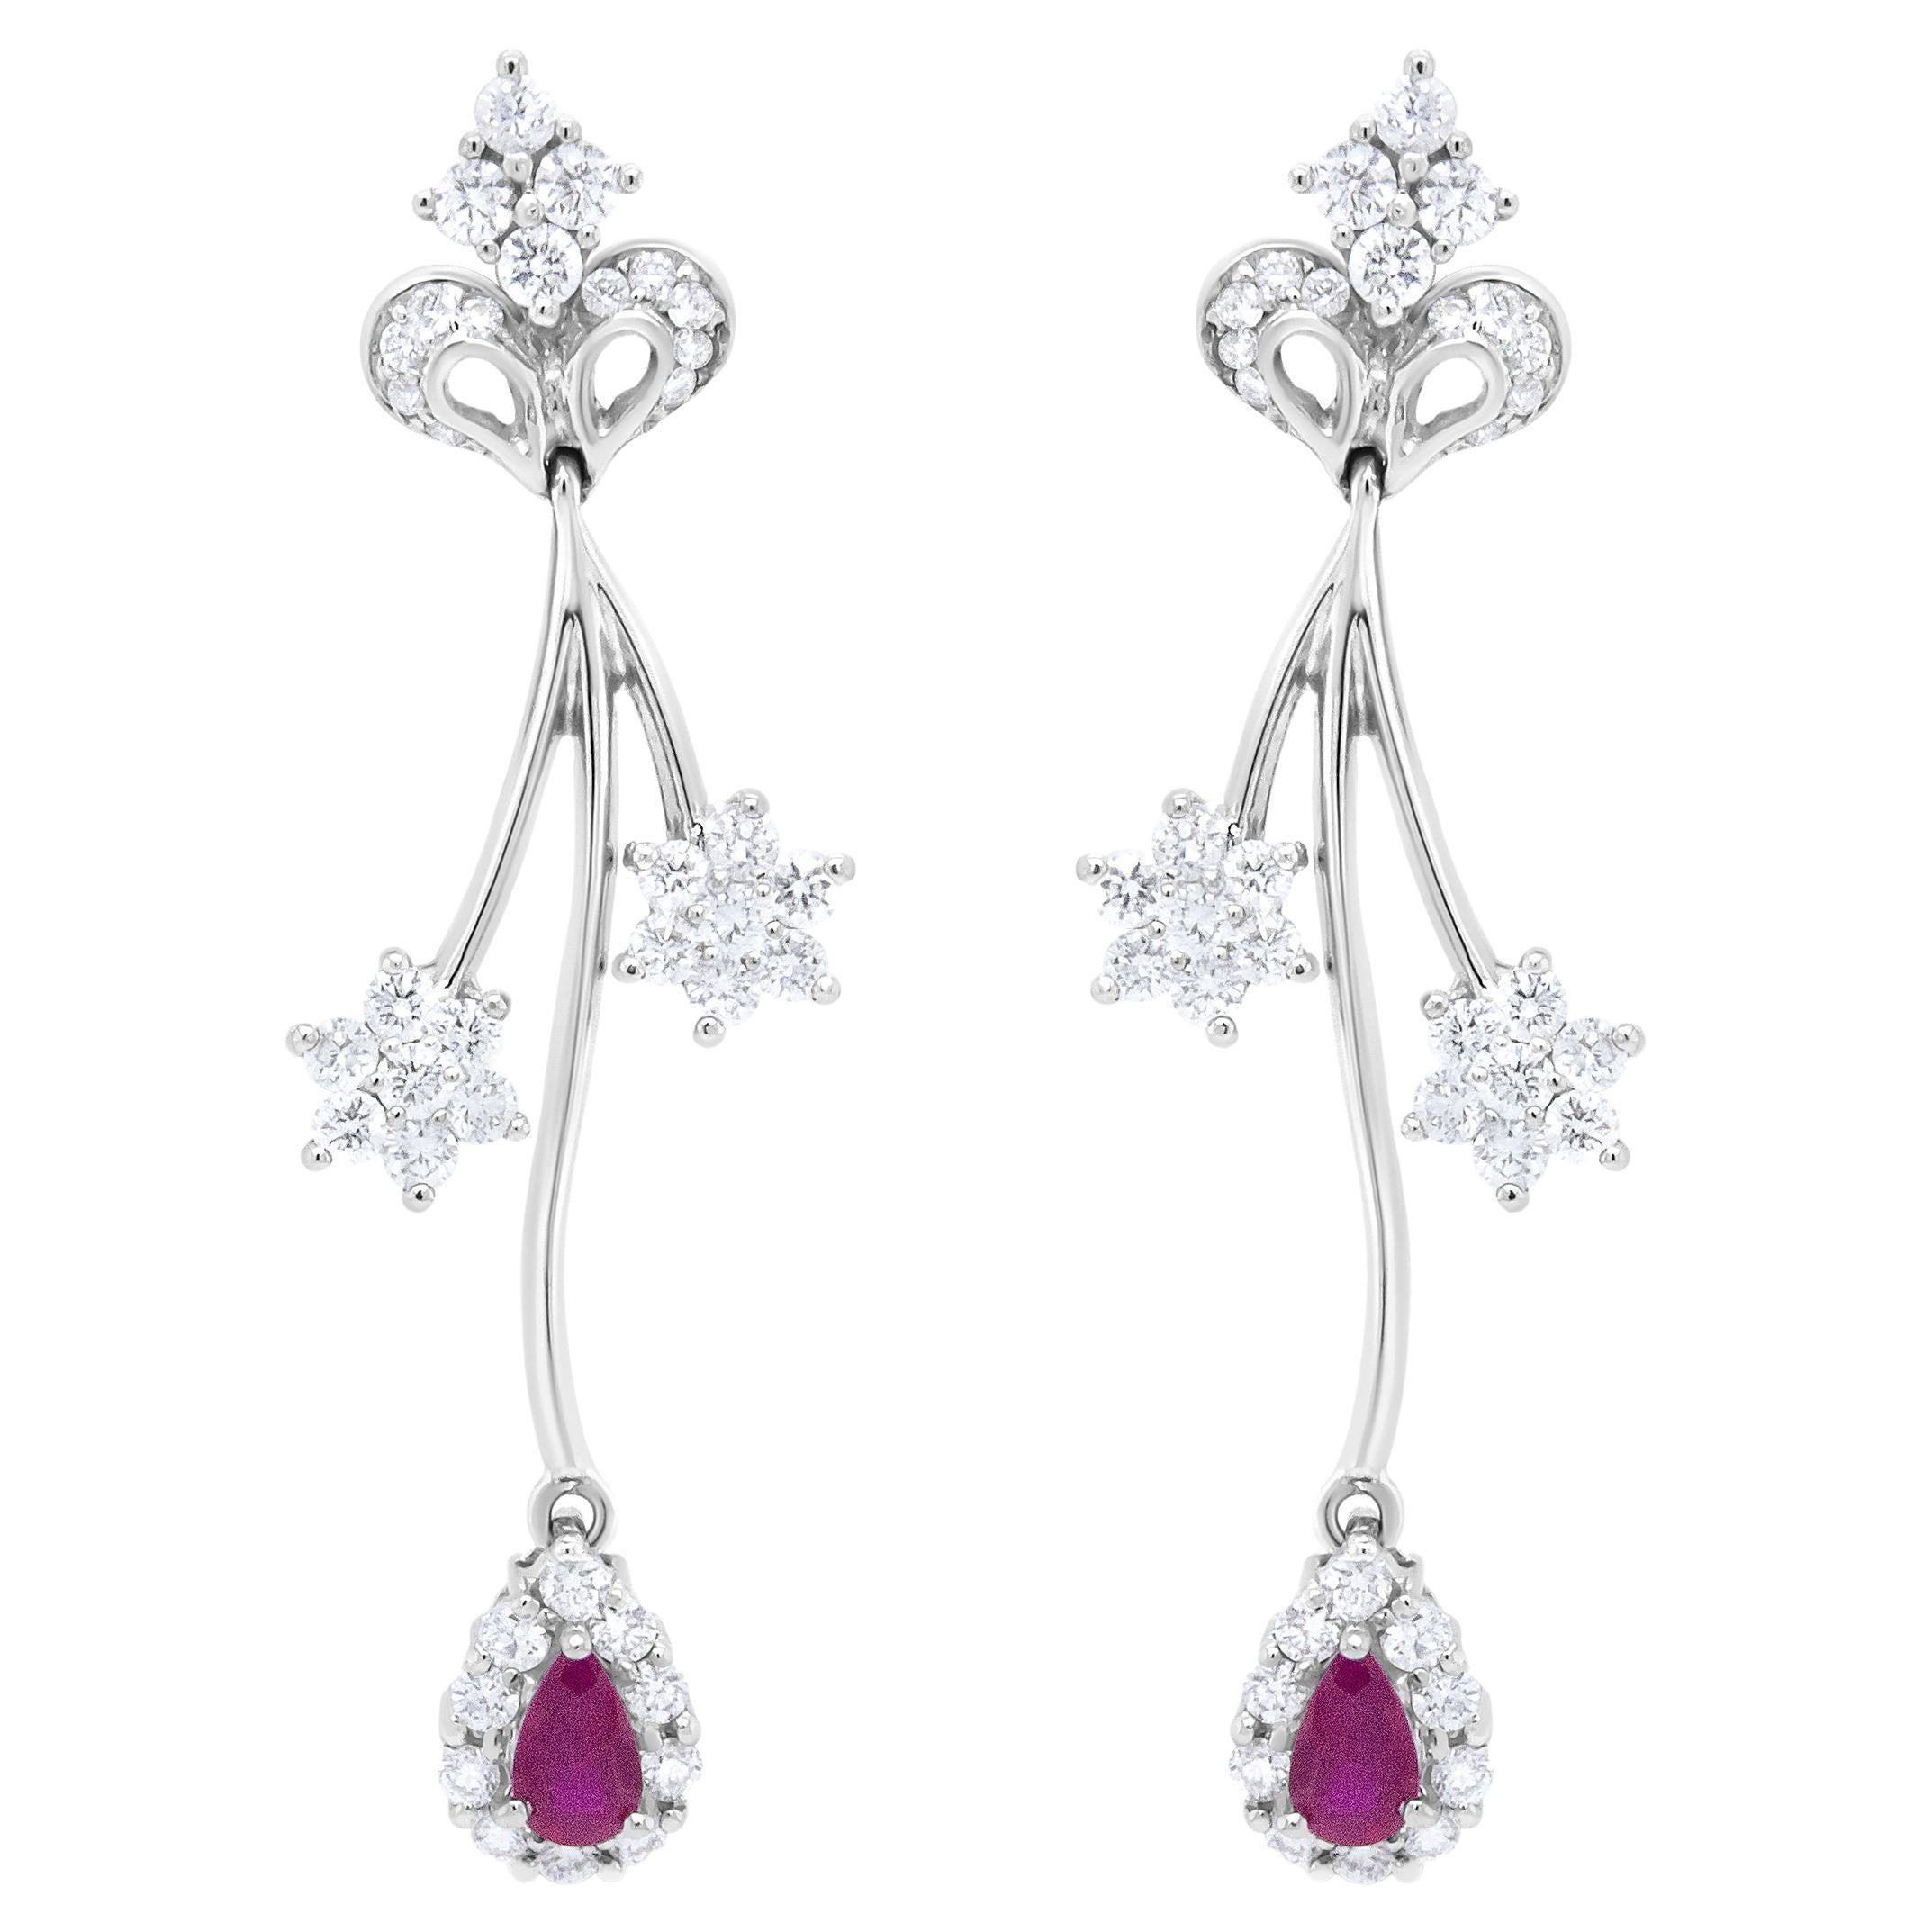 18K White Gold 1 1/4 Carat Diamond and Red Ruby Freeform Dangle Drop Earring